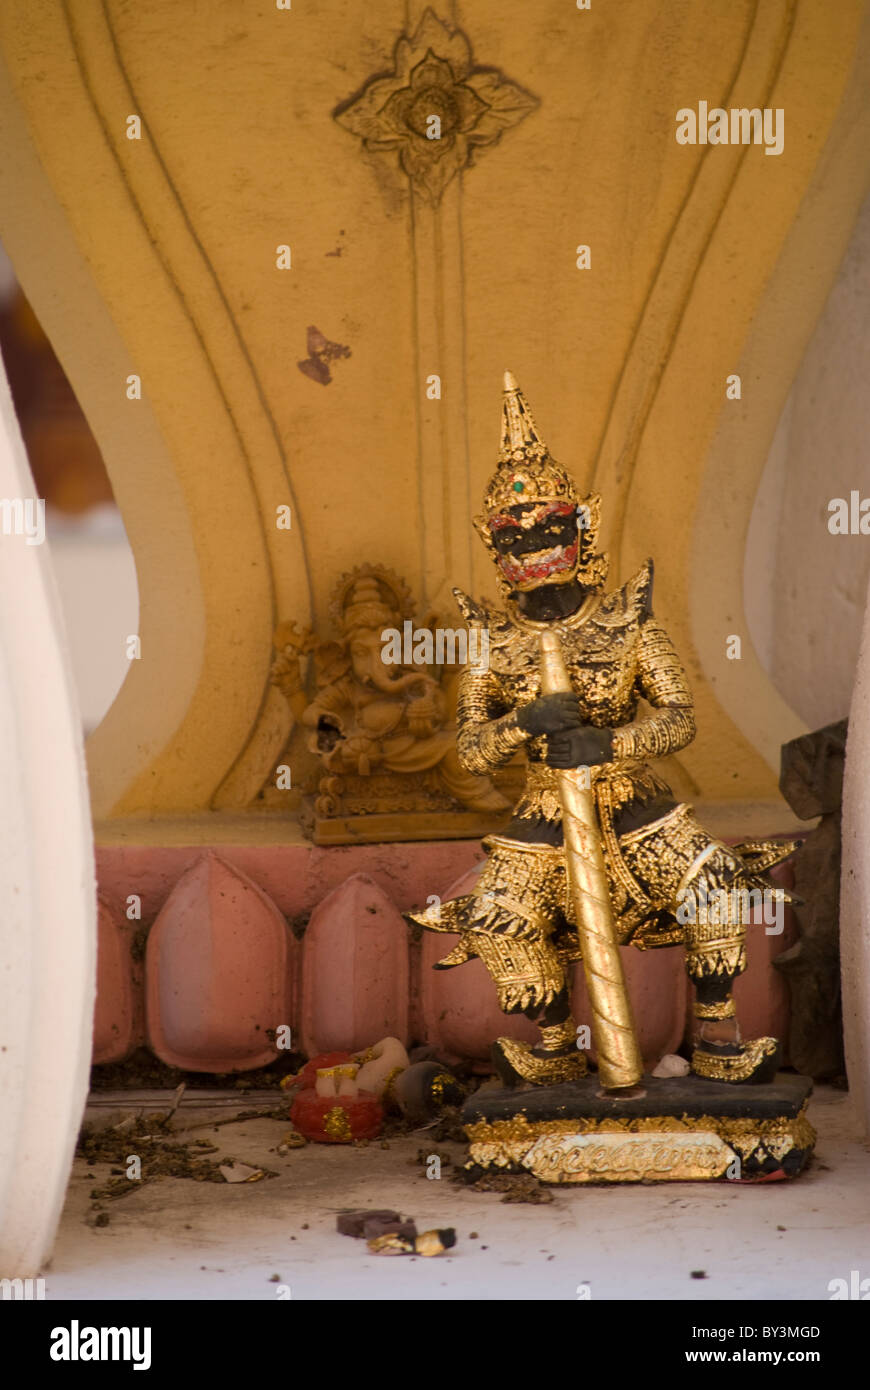 Broken or destroyed holy objects like this mythical figure of yaksha were left in the temple. Stock Photo